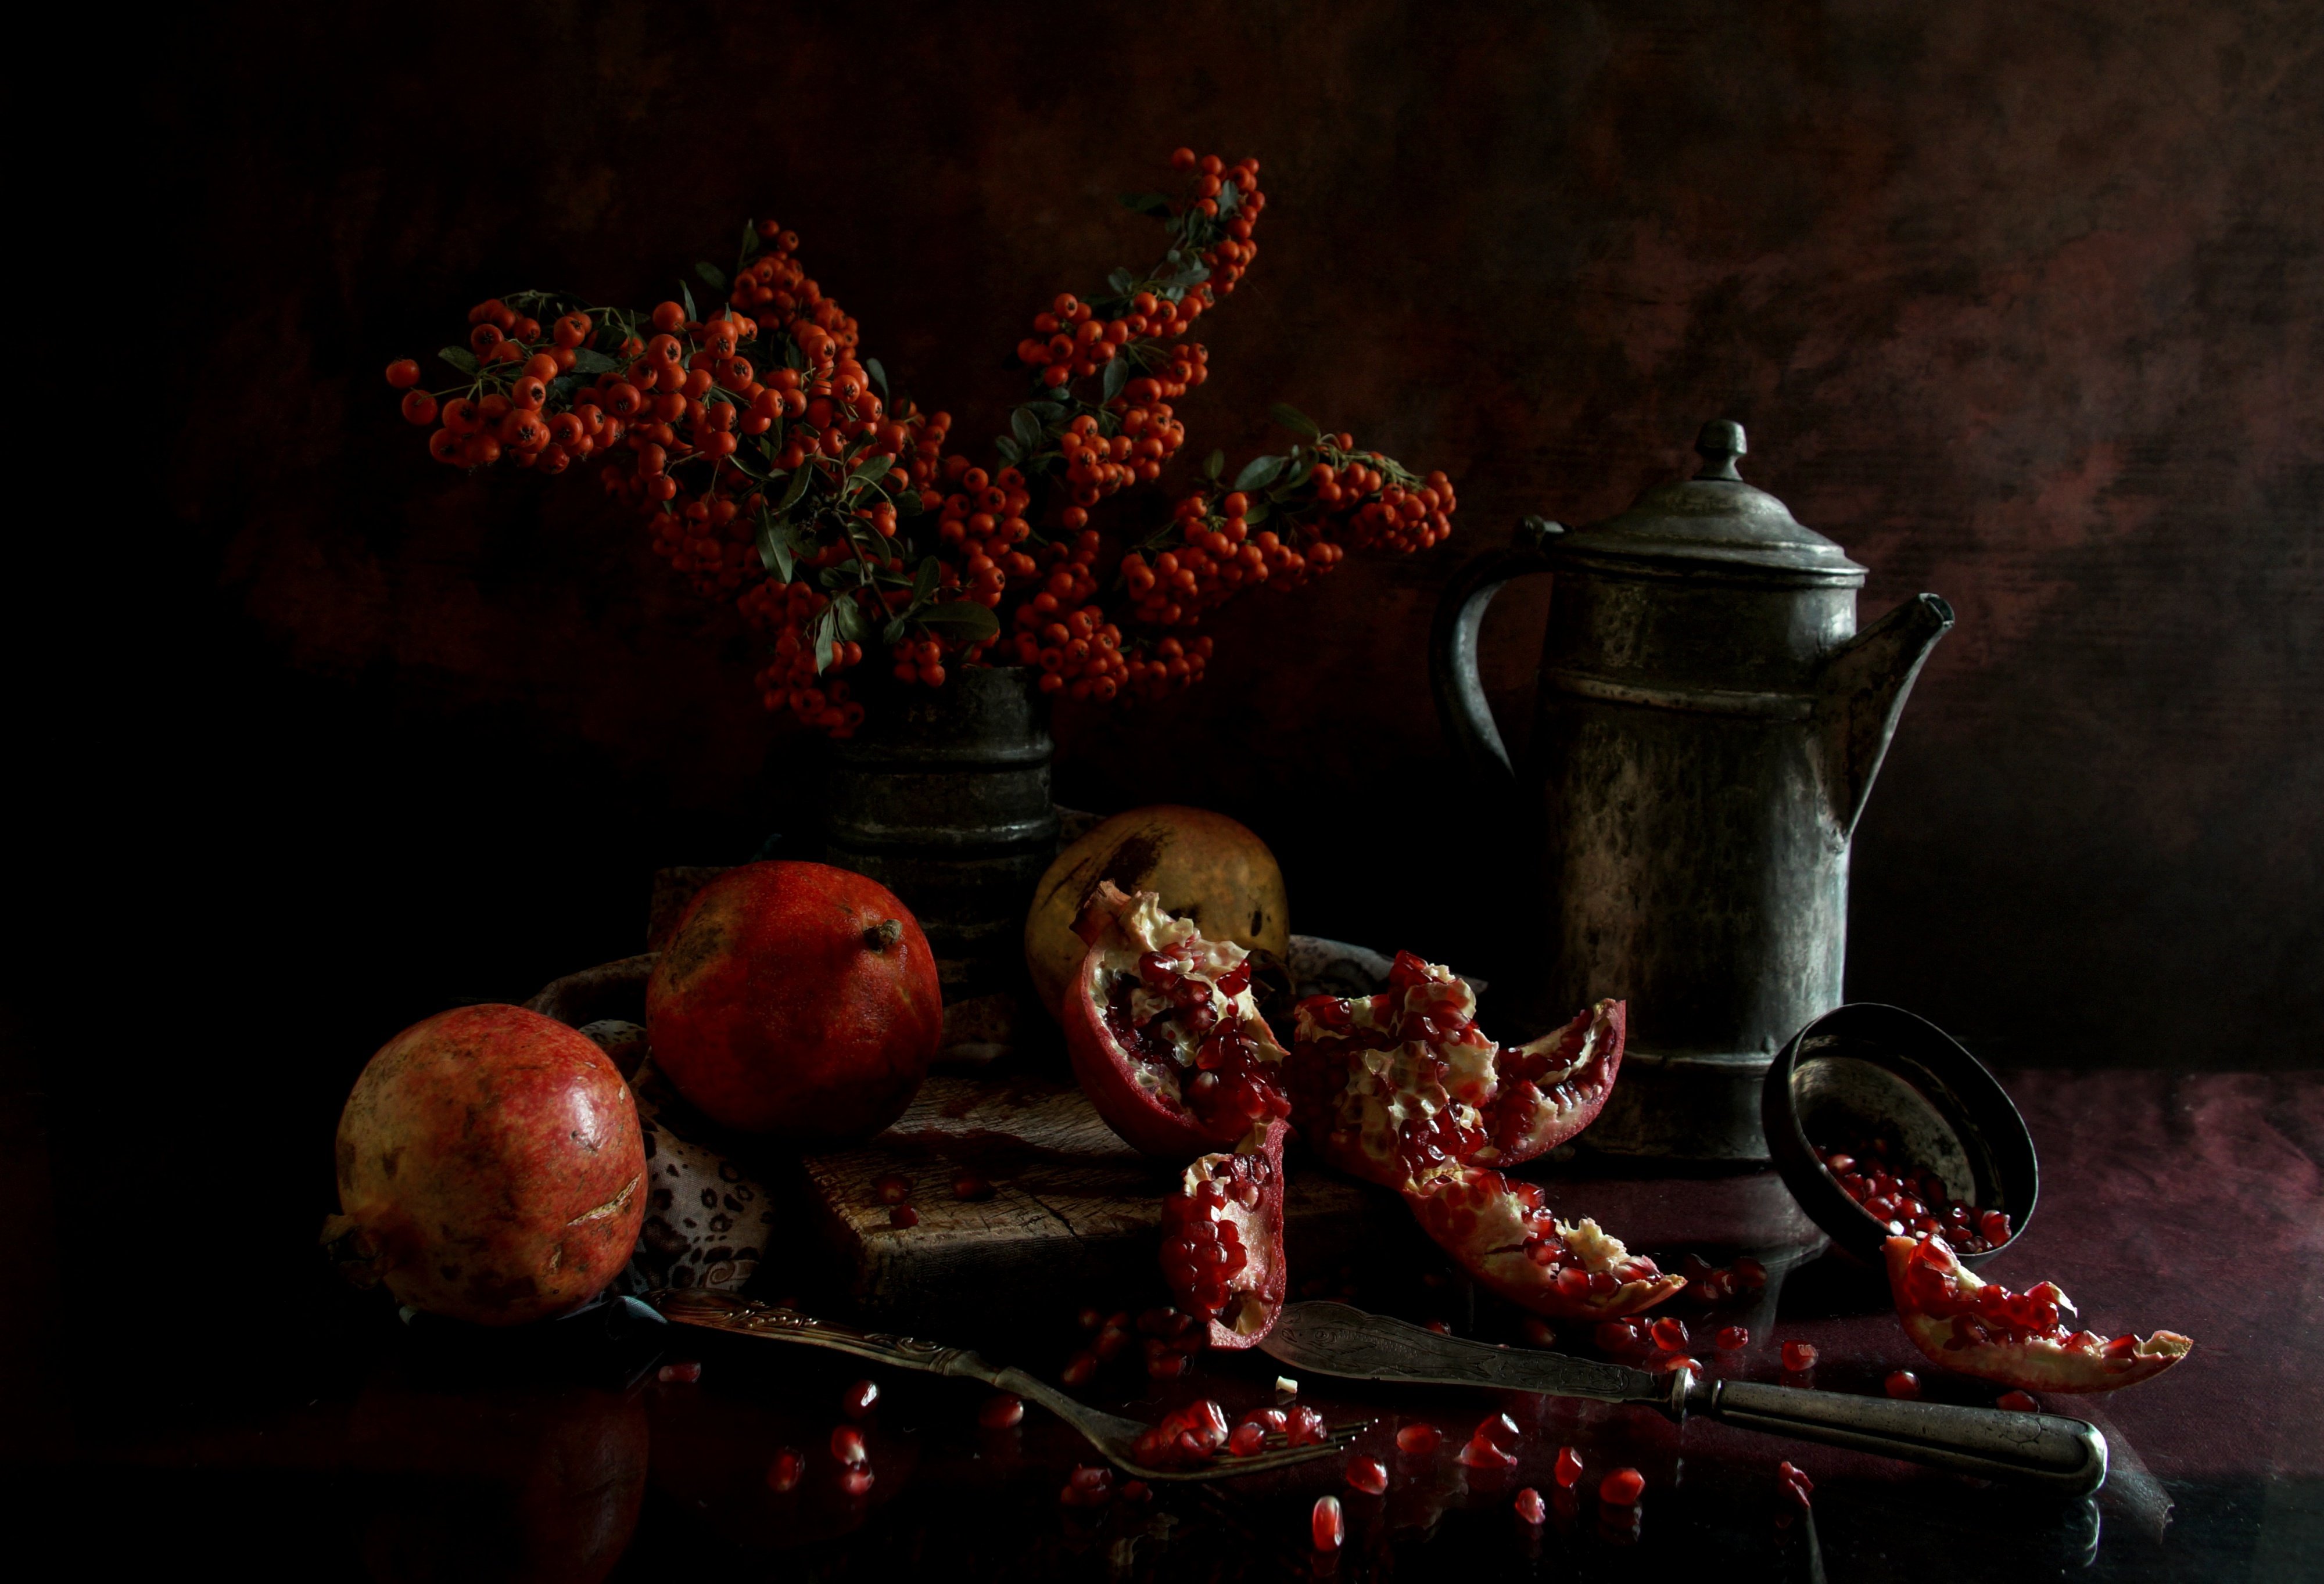 grapes and pomegranate, hilmi ayhan